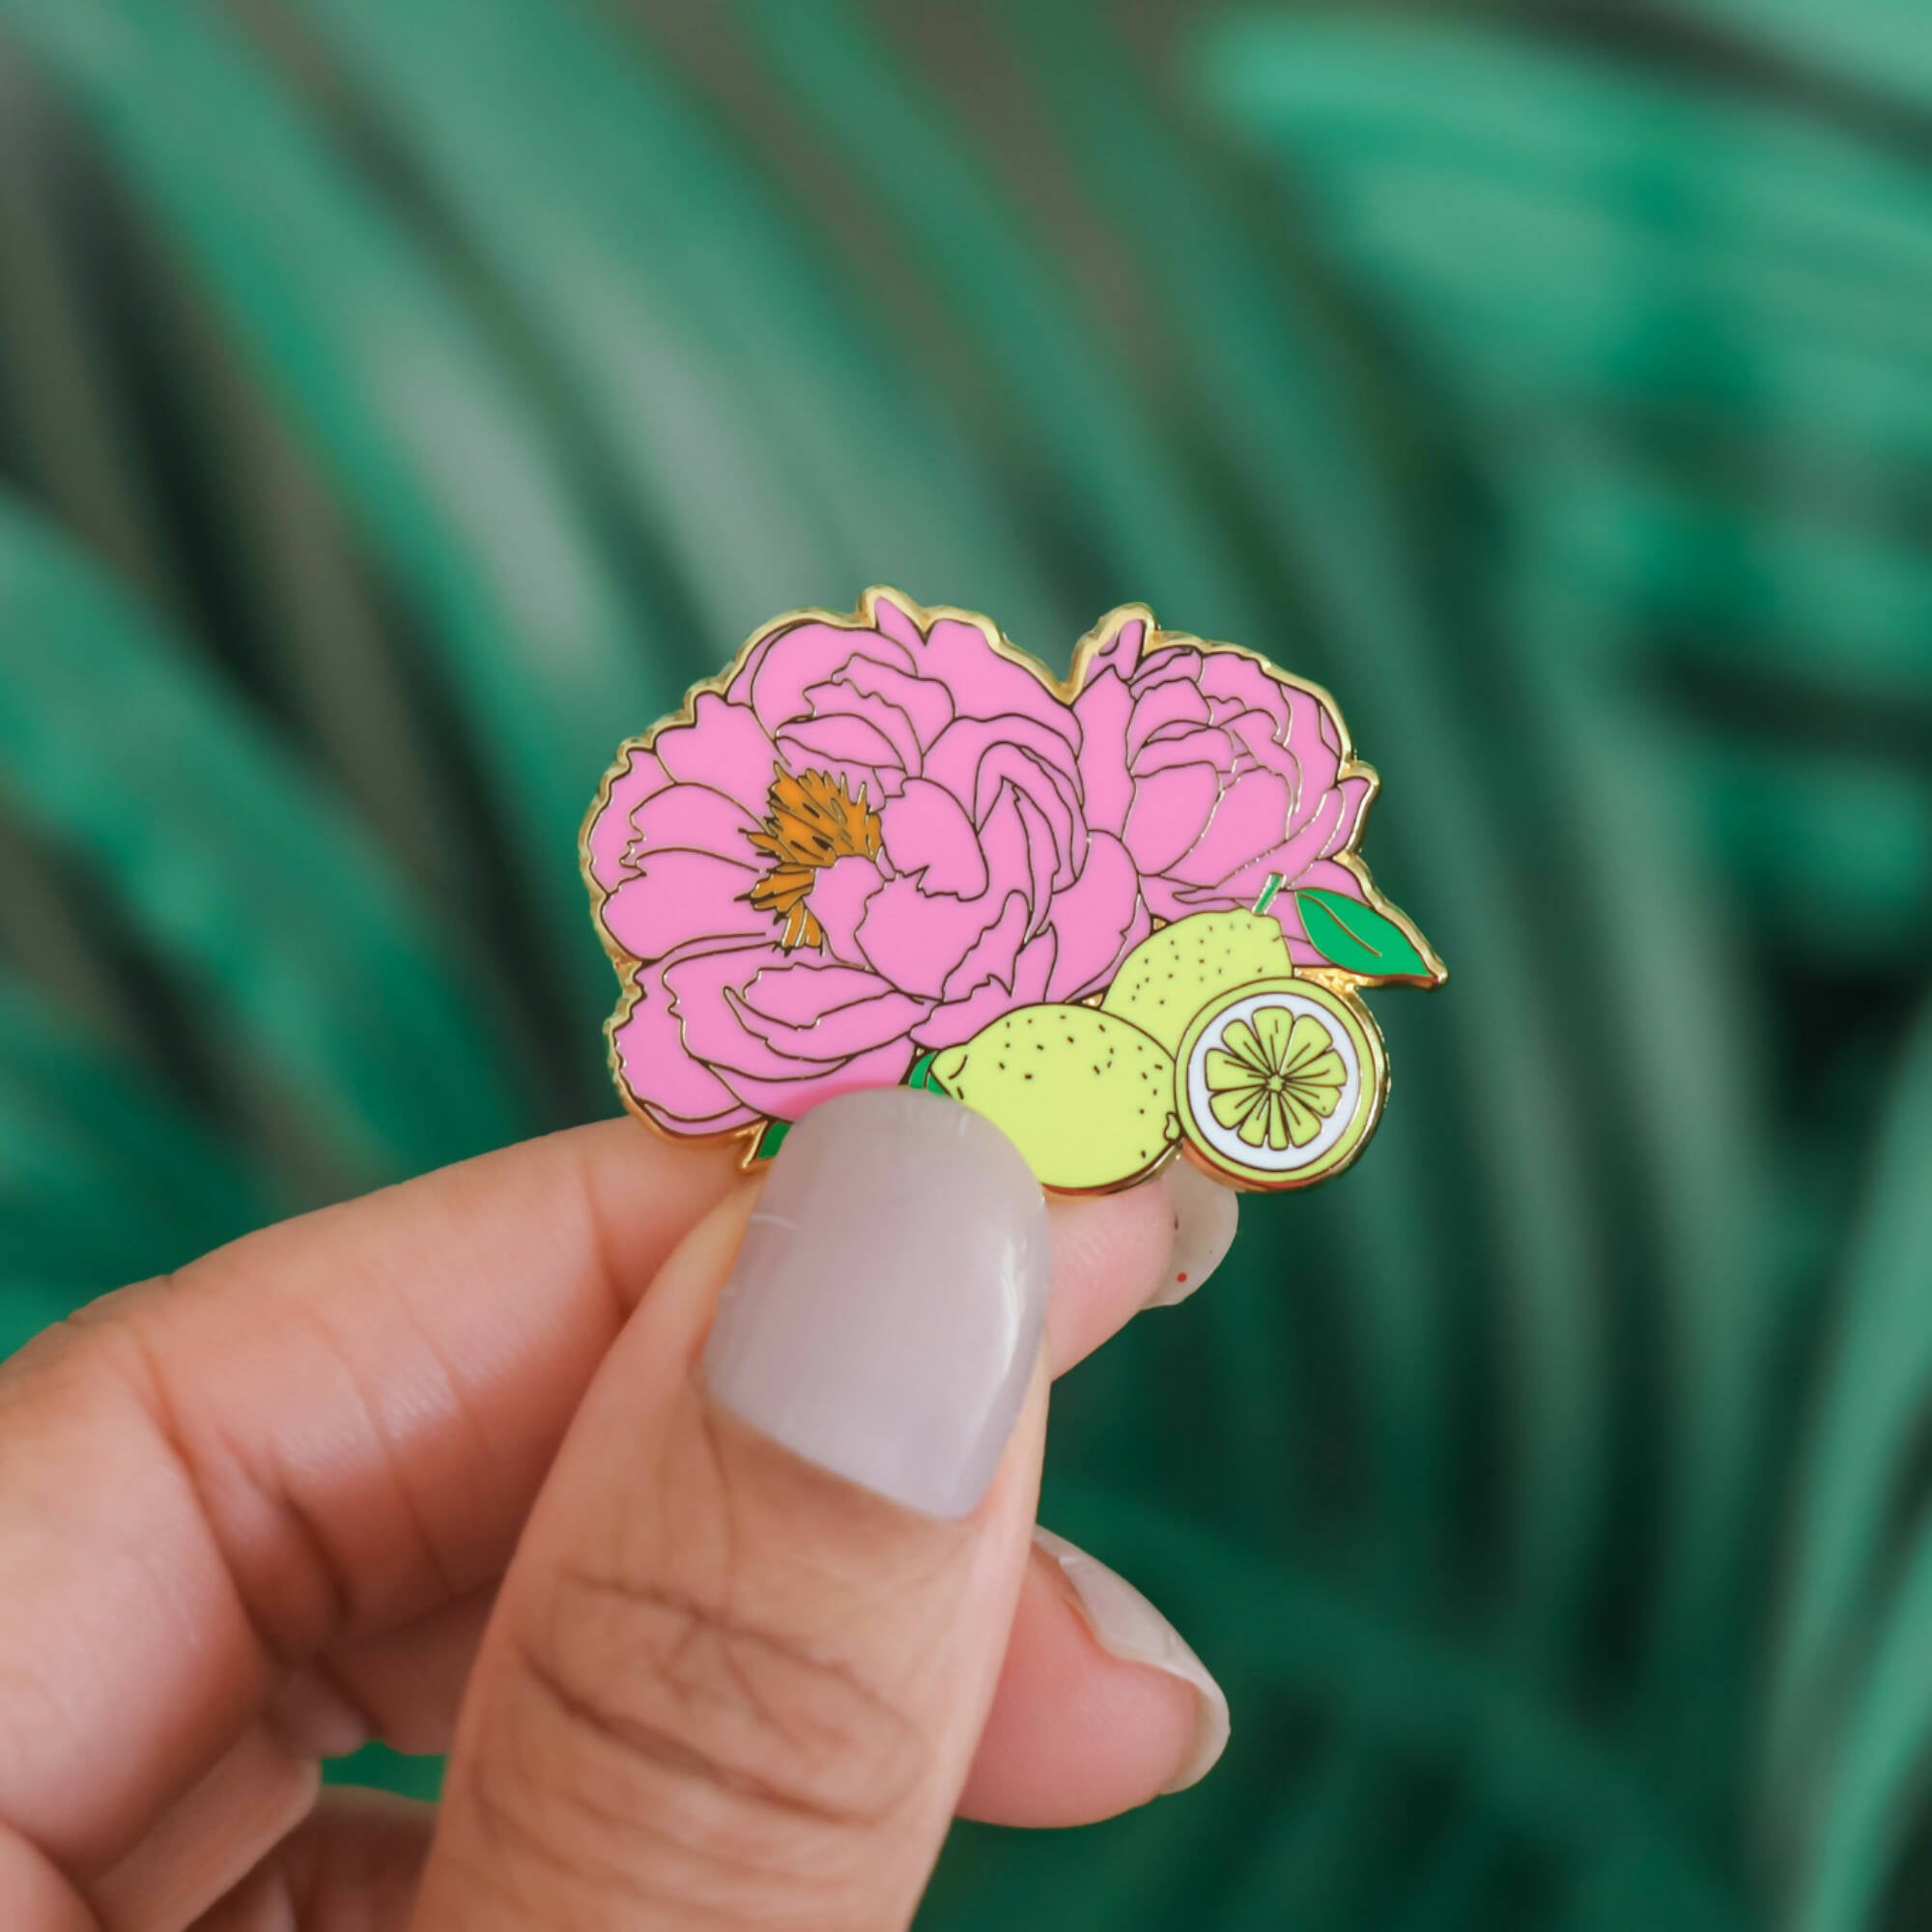 Floral Enamel Pin Collection